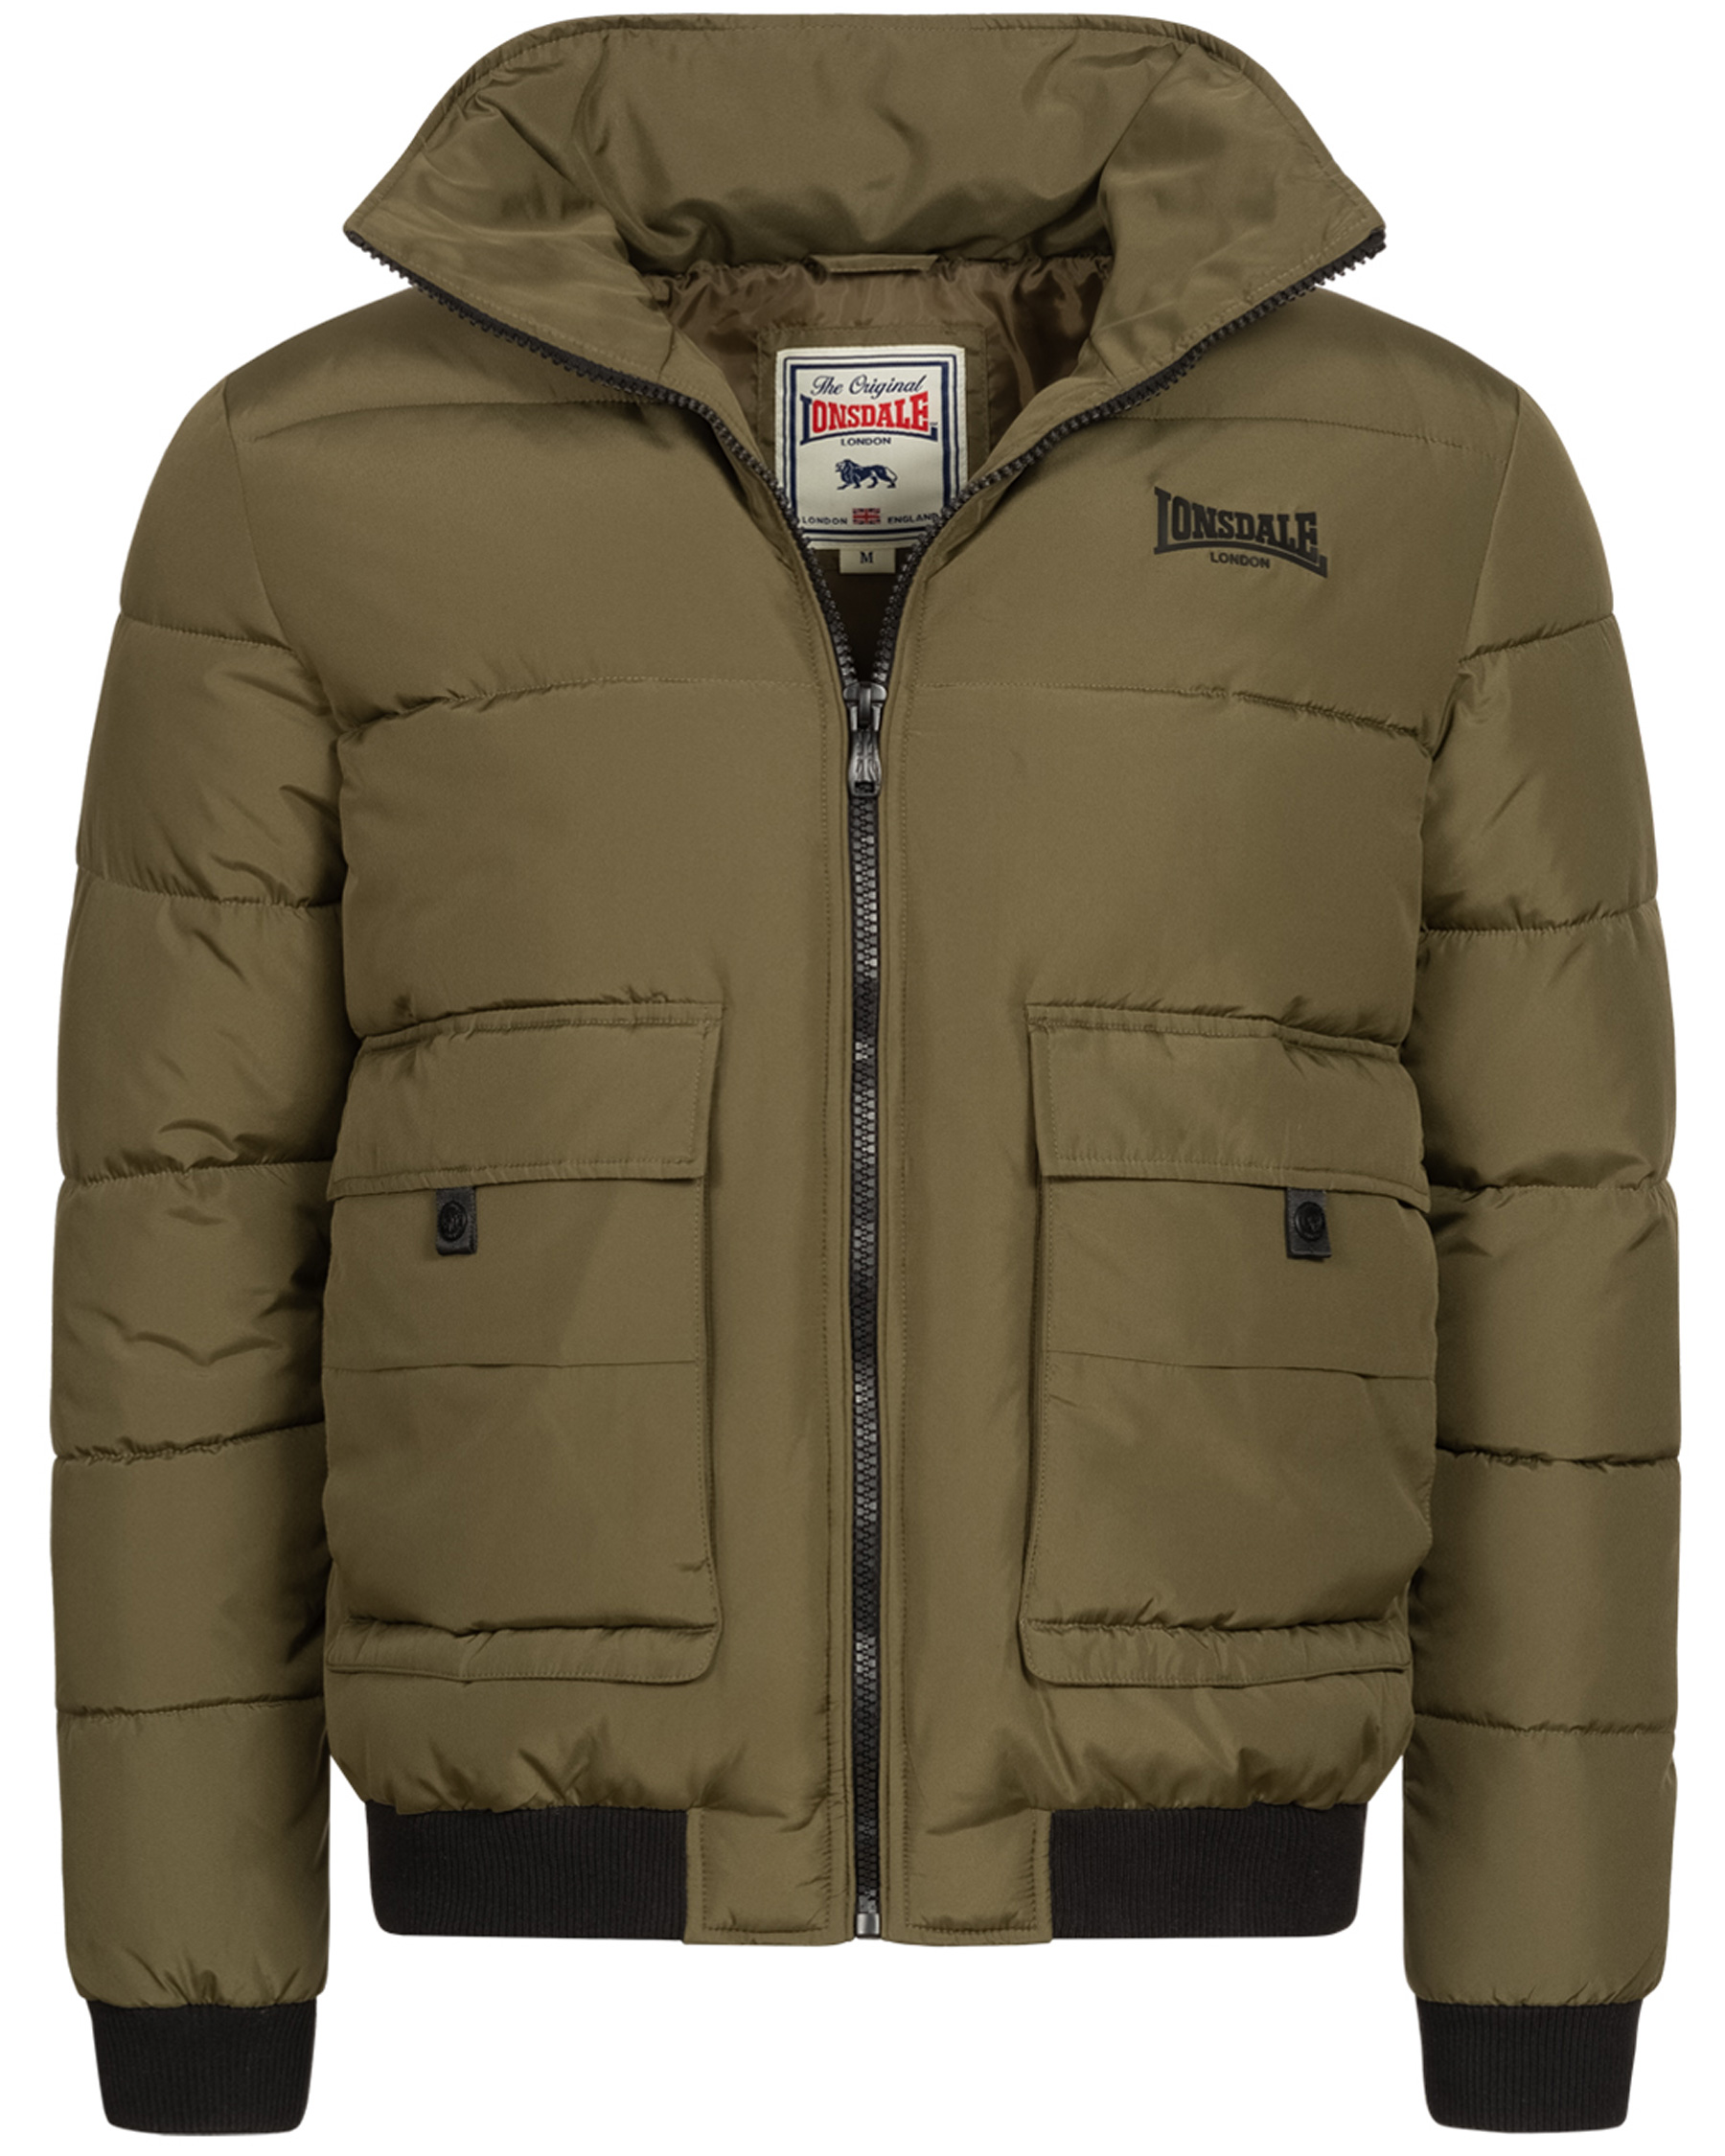 Lonsdale mens quilted jacket Tayport